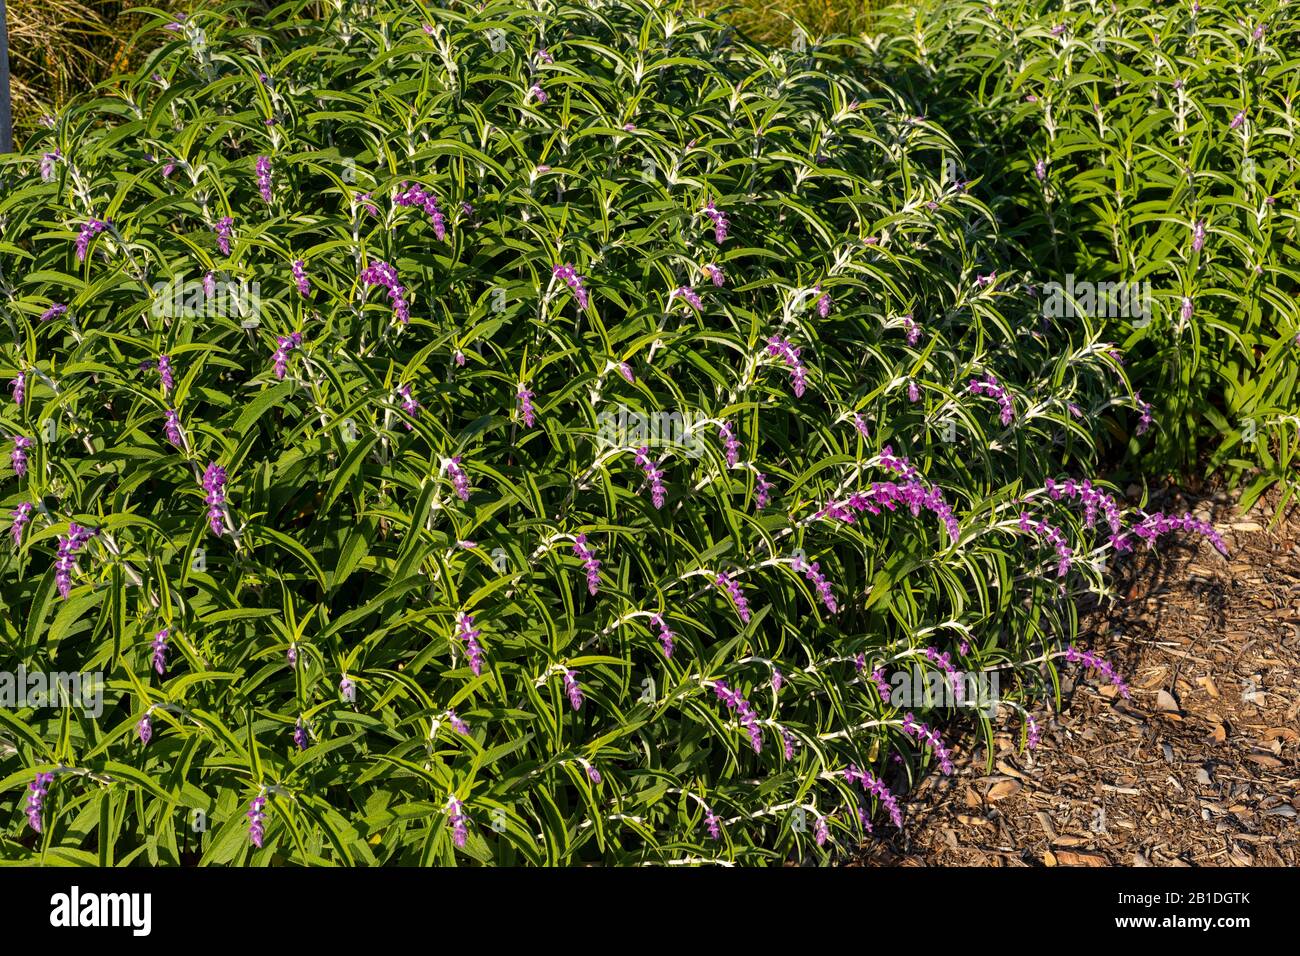 Mexican Bush Sage (Salvia leucantha) is a drought-tolerant plant.  Here it is shown in golden hour light with full velvety purple blooms. Stock Photo